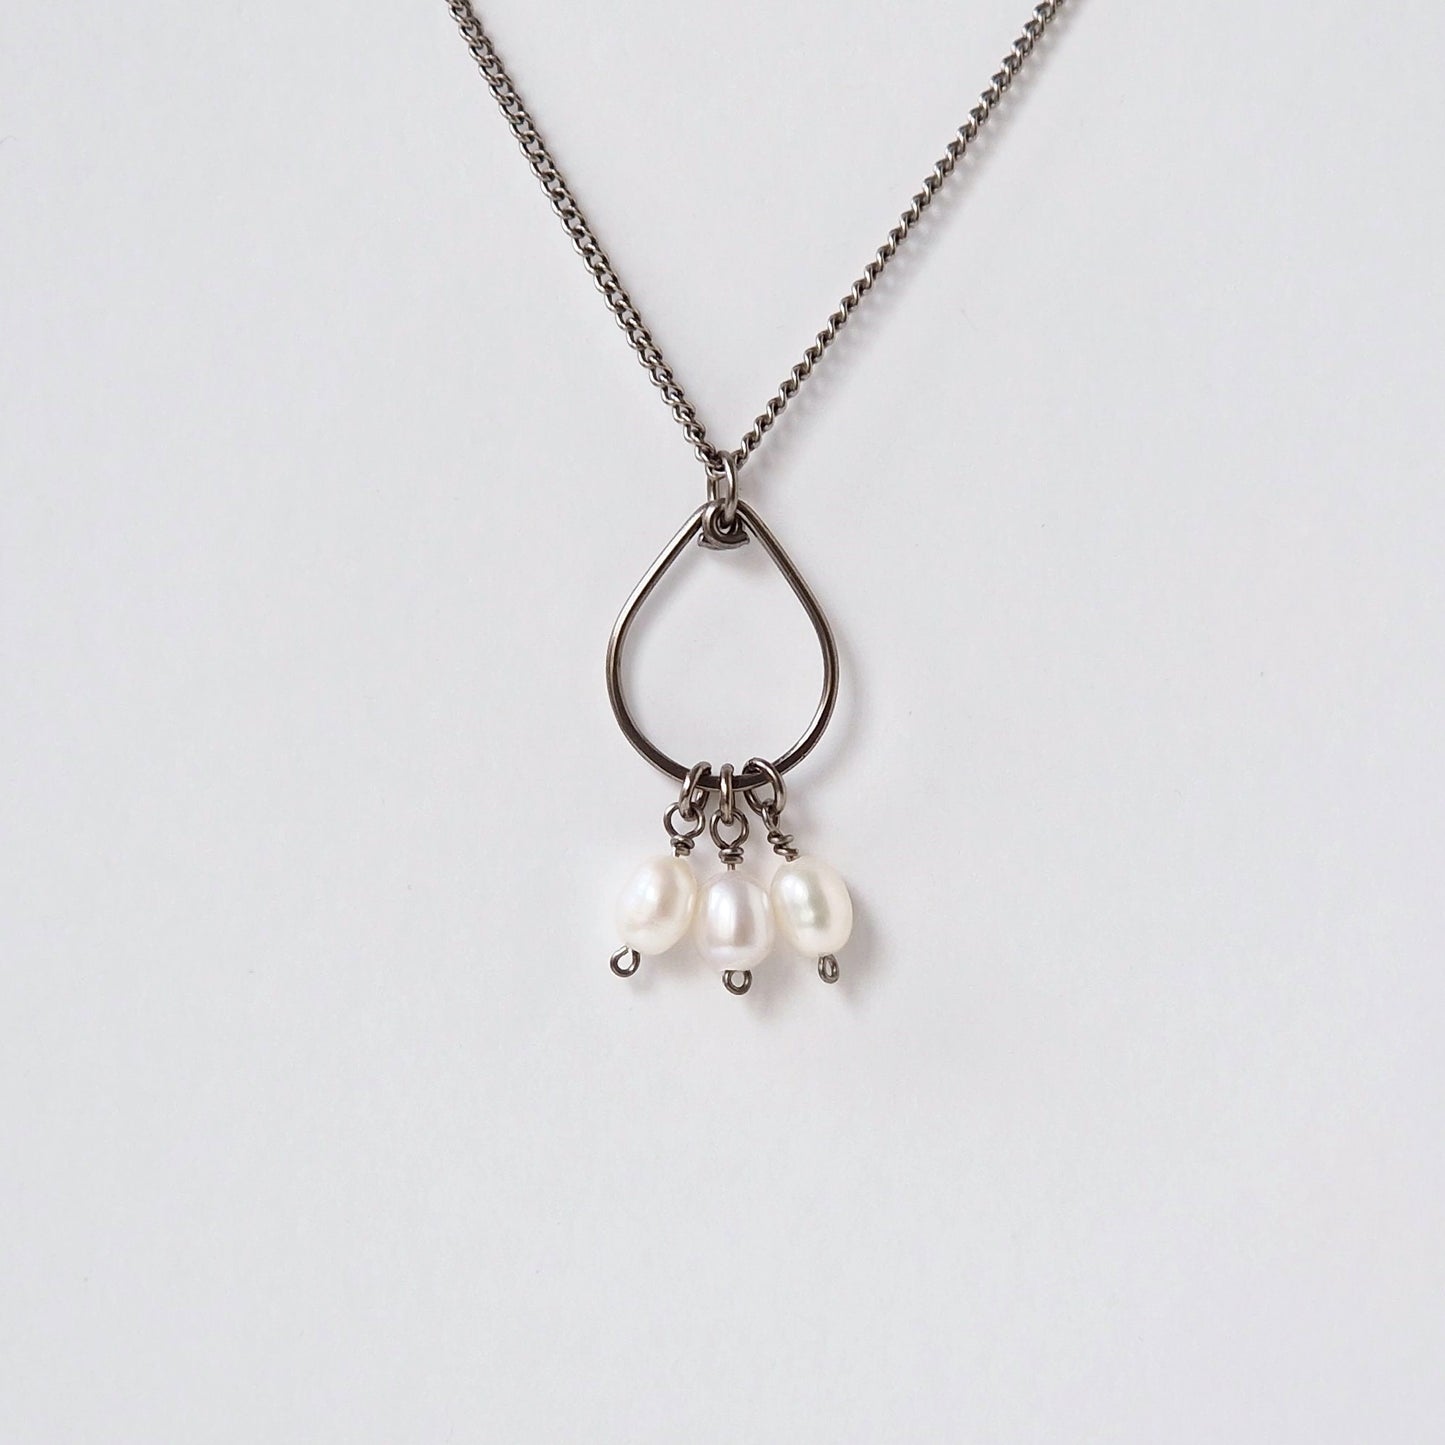 Titanium Teardrop Necklace with White Pearls